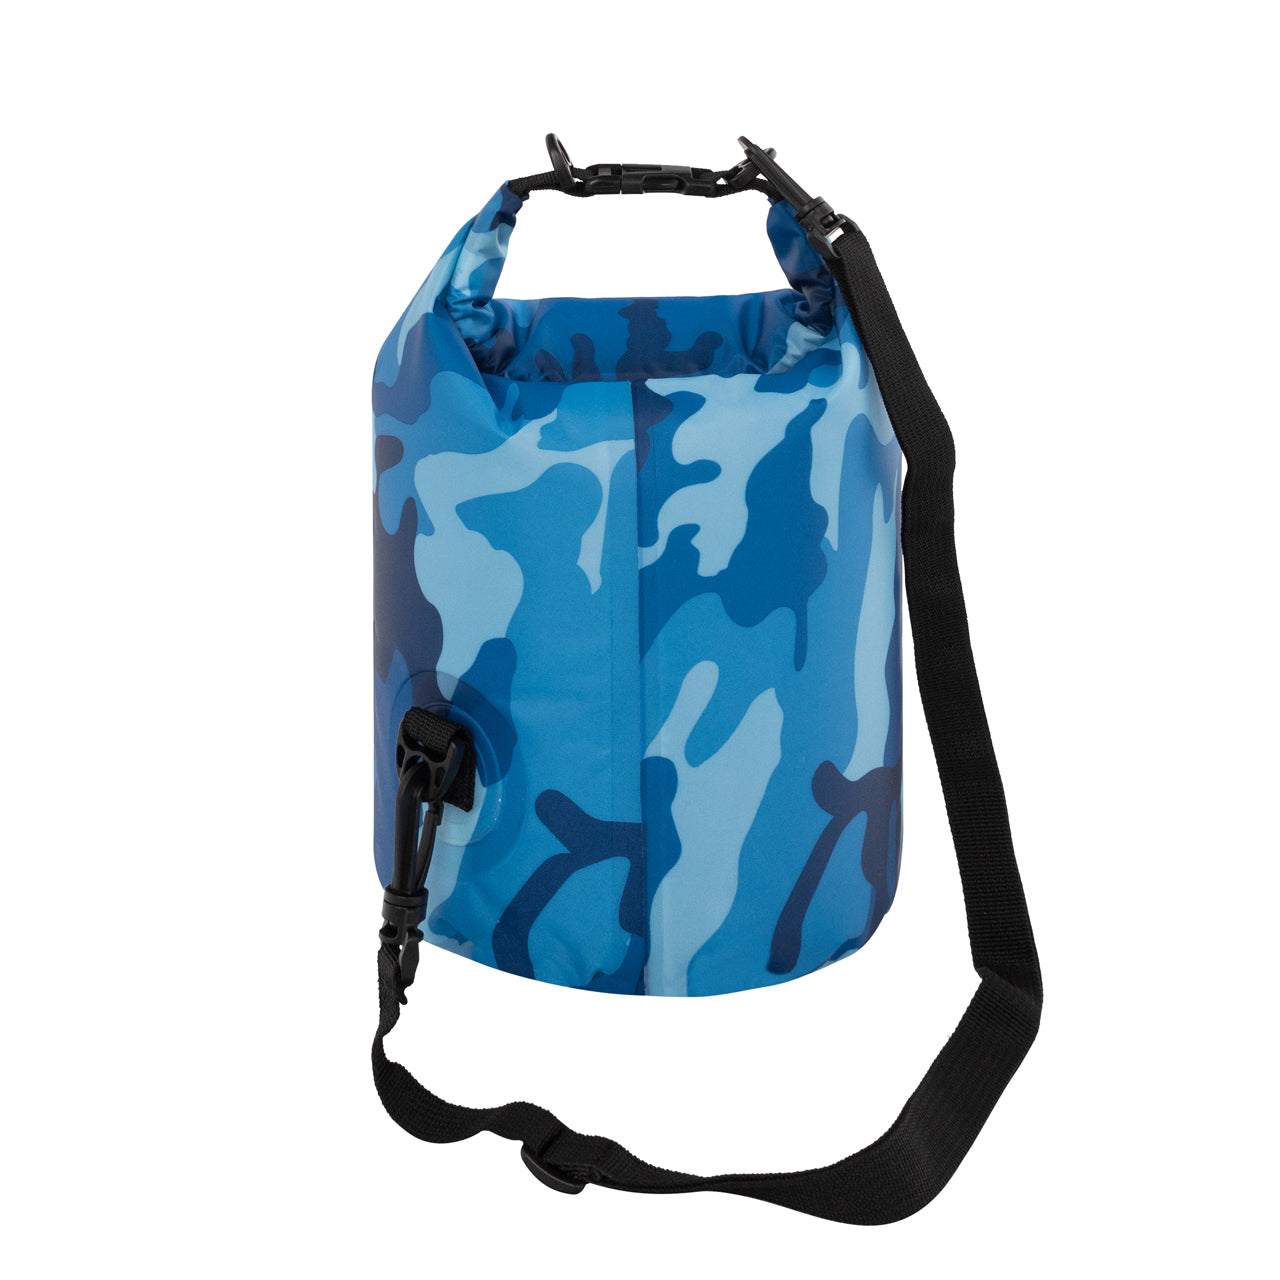 TrailGear 5 liter Heavy-Duty Camouflaged Dry Bag in the blue camo variation.